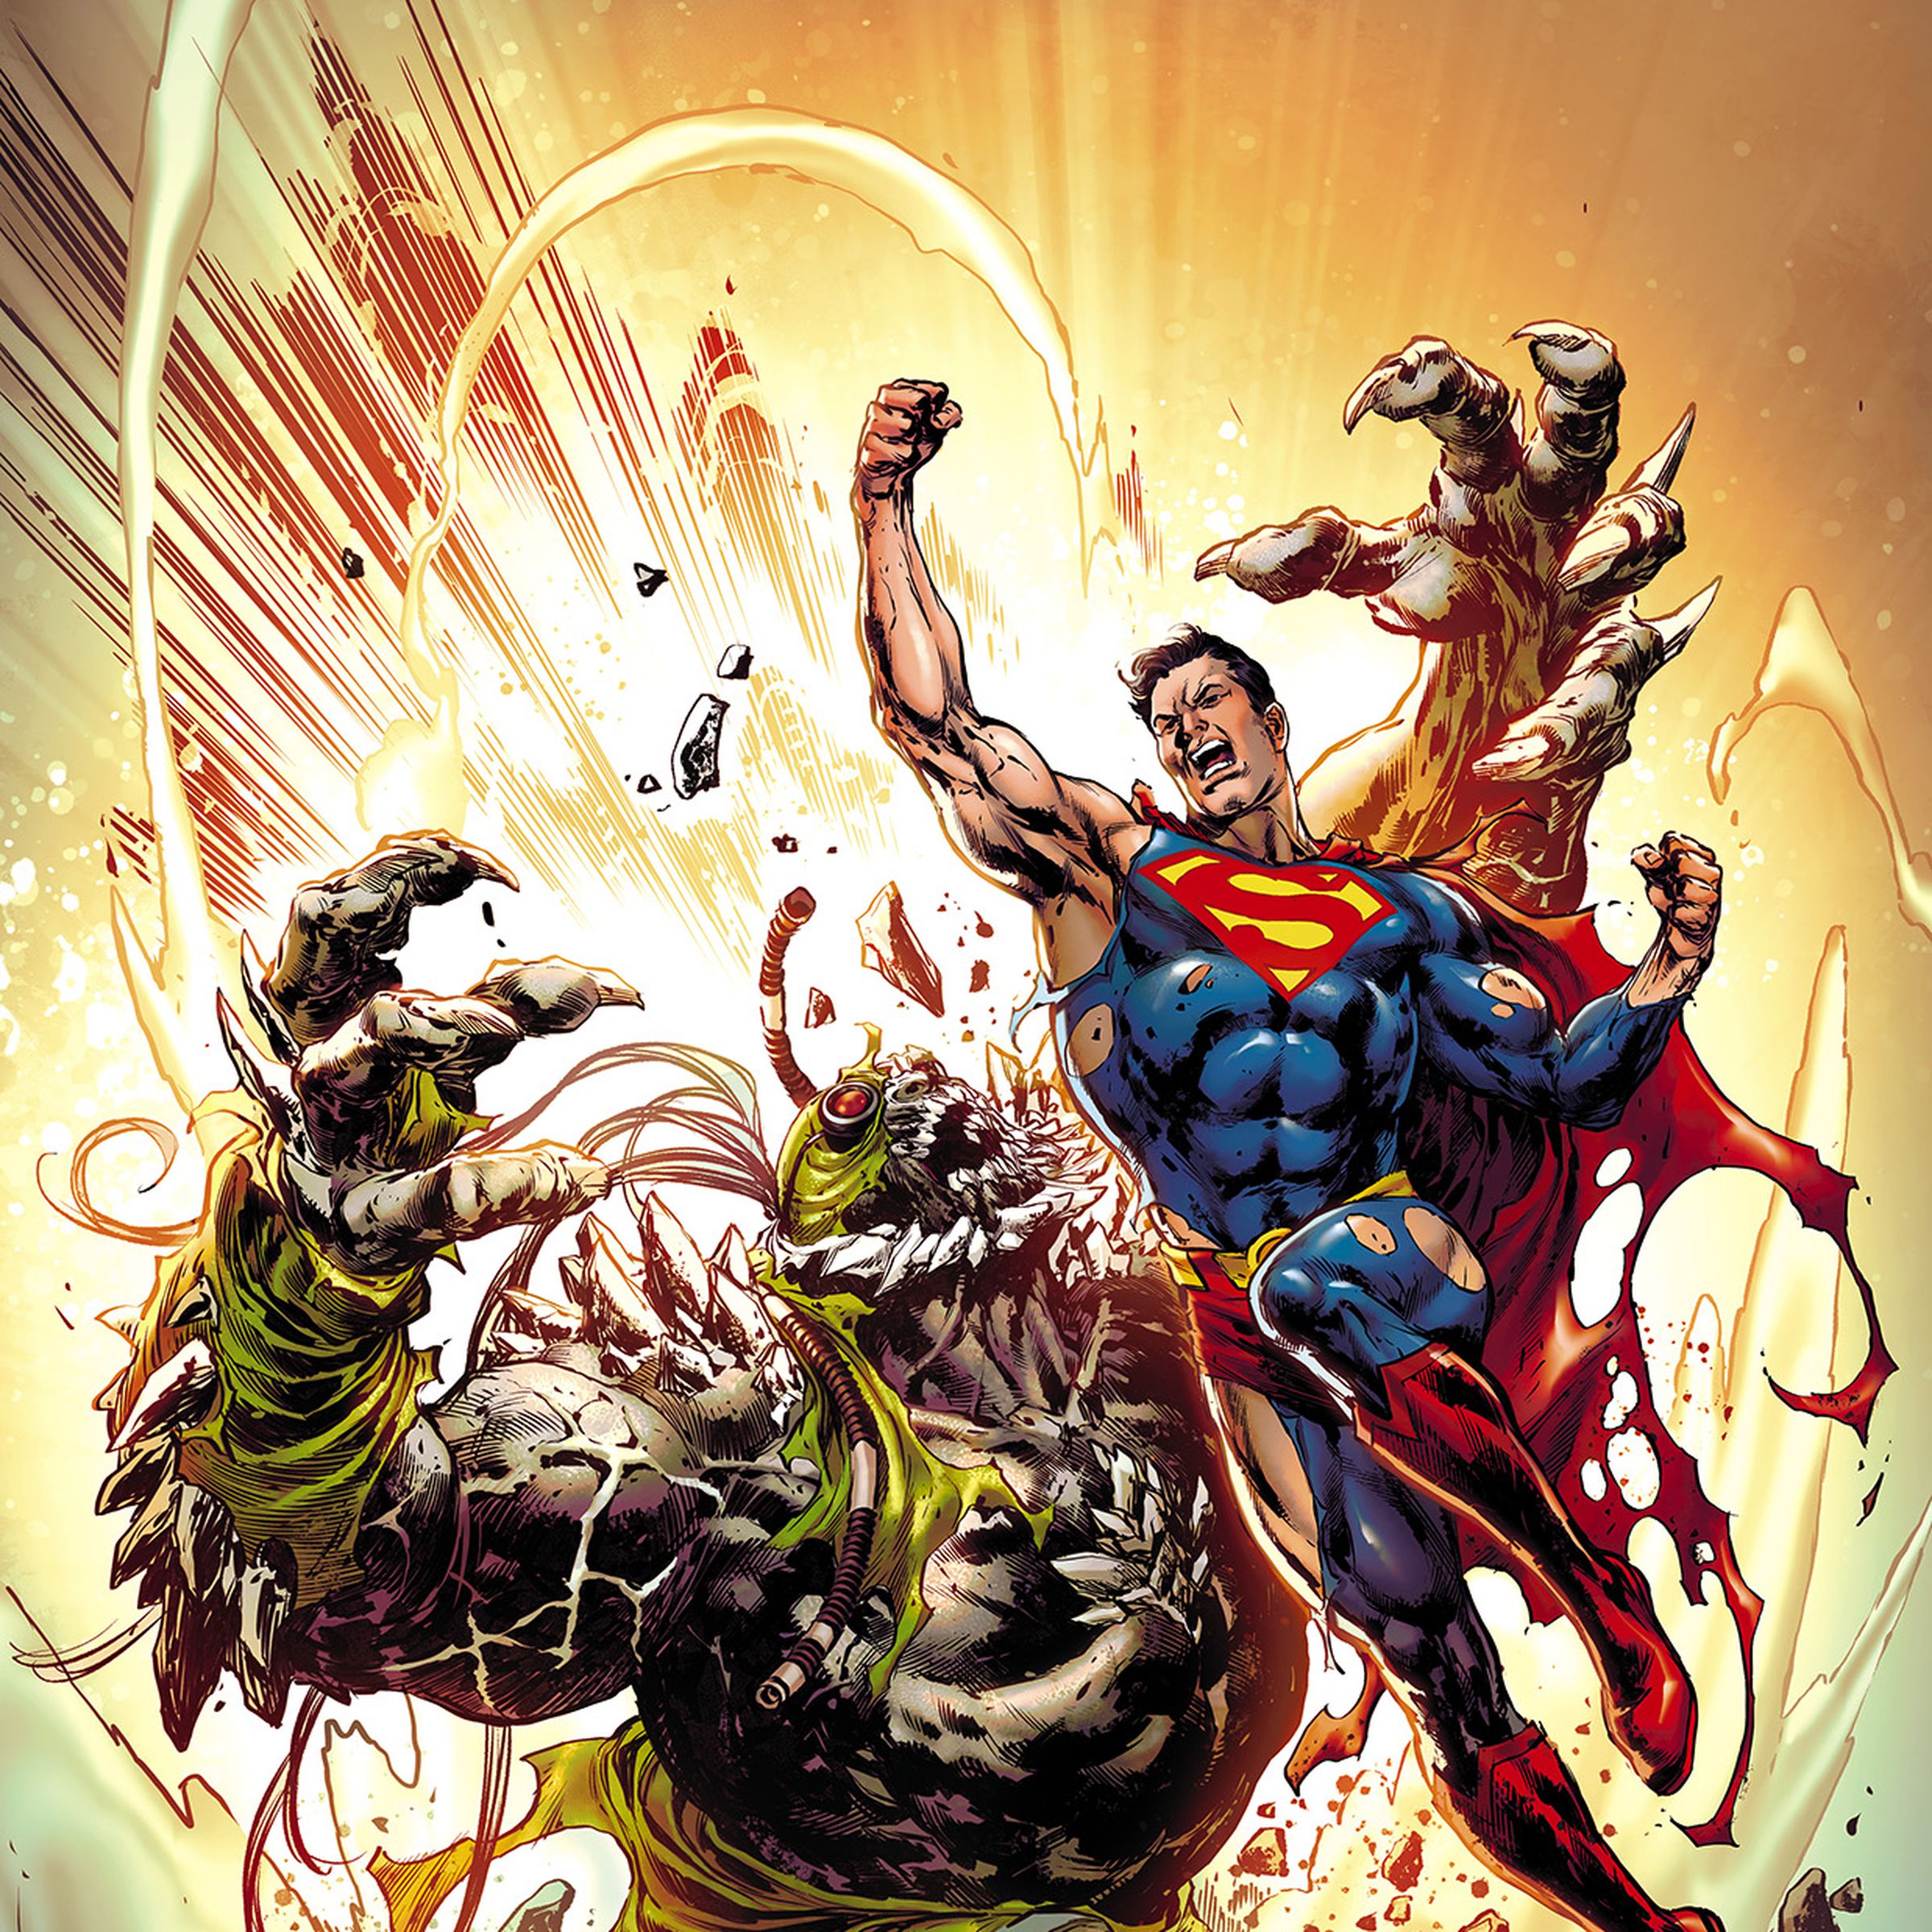 A comic book scene showing Superman facing off against an enemy